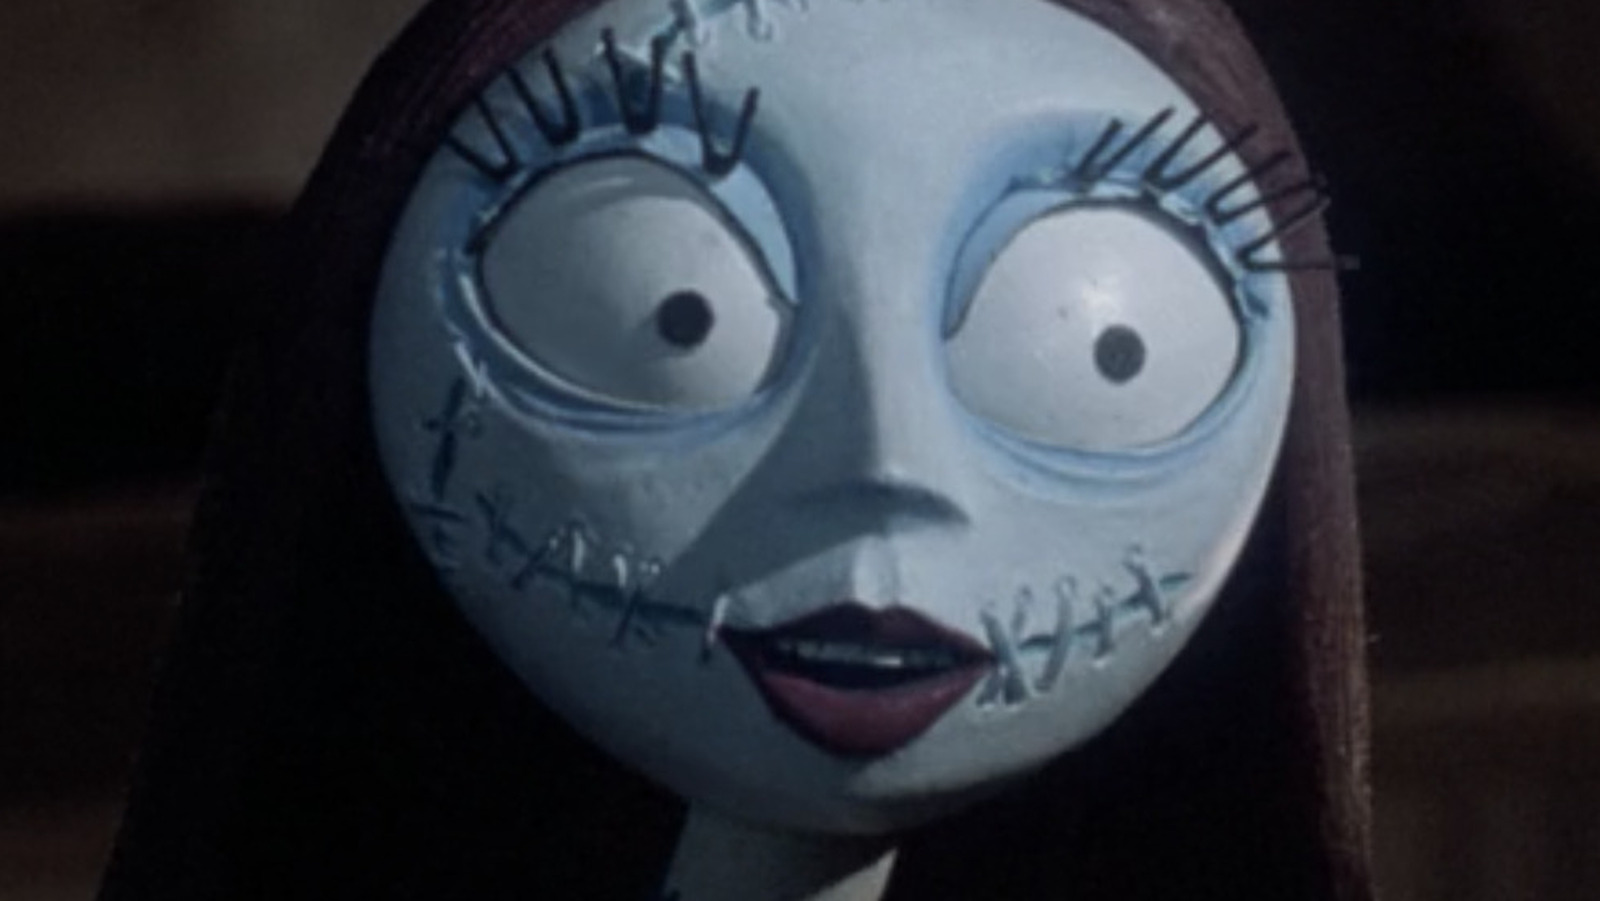 Sally's Nail Color in "The Nightmare Before Christmas" - wide 1